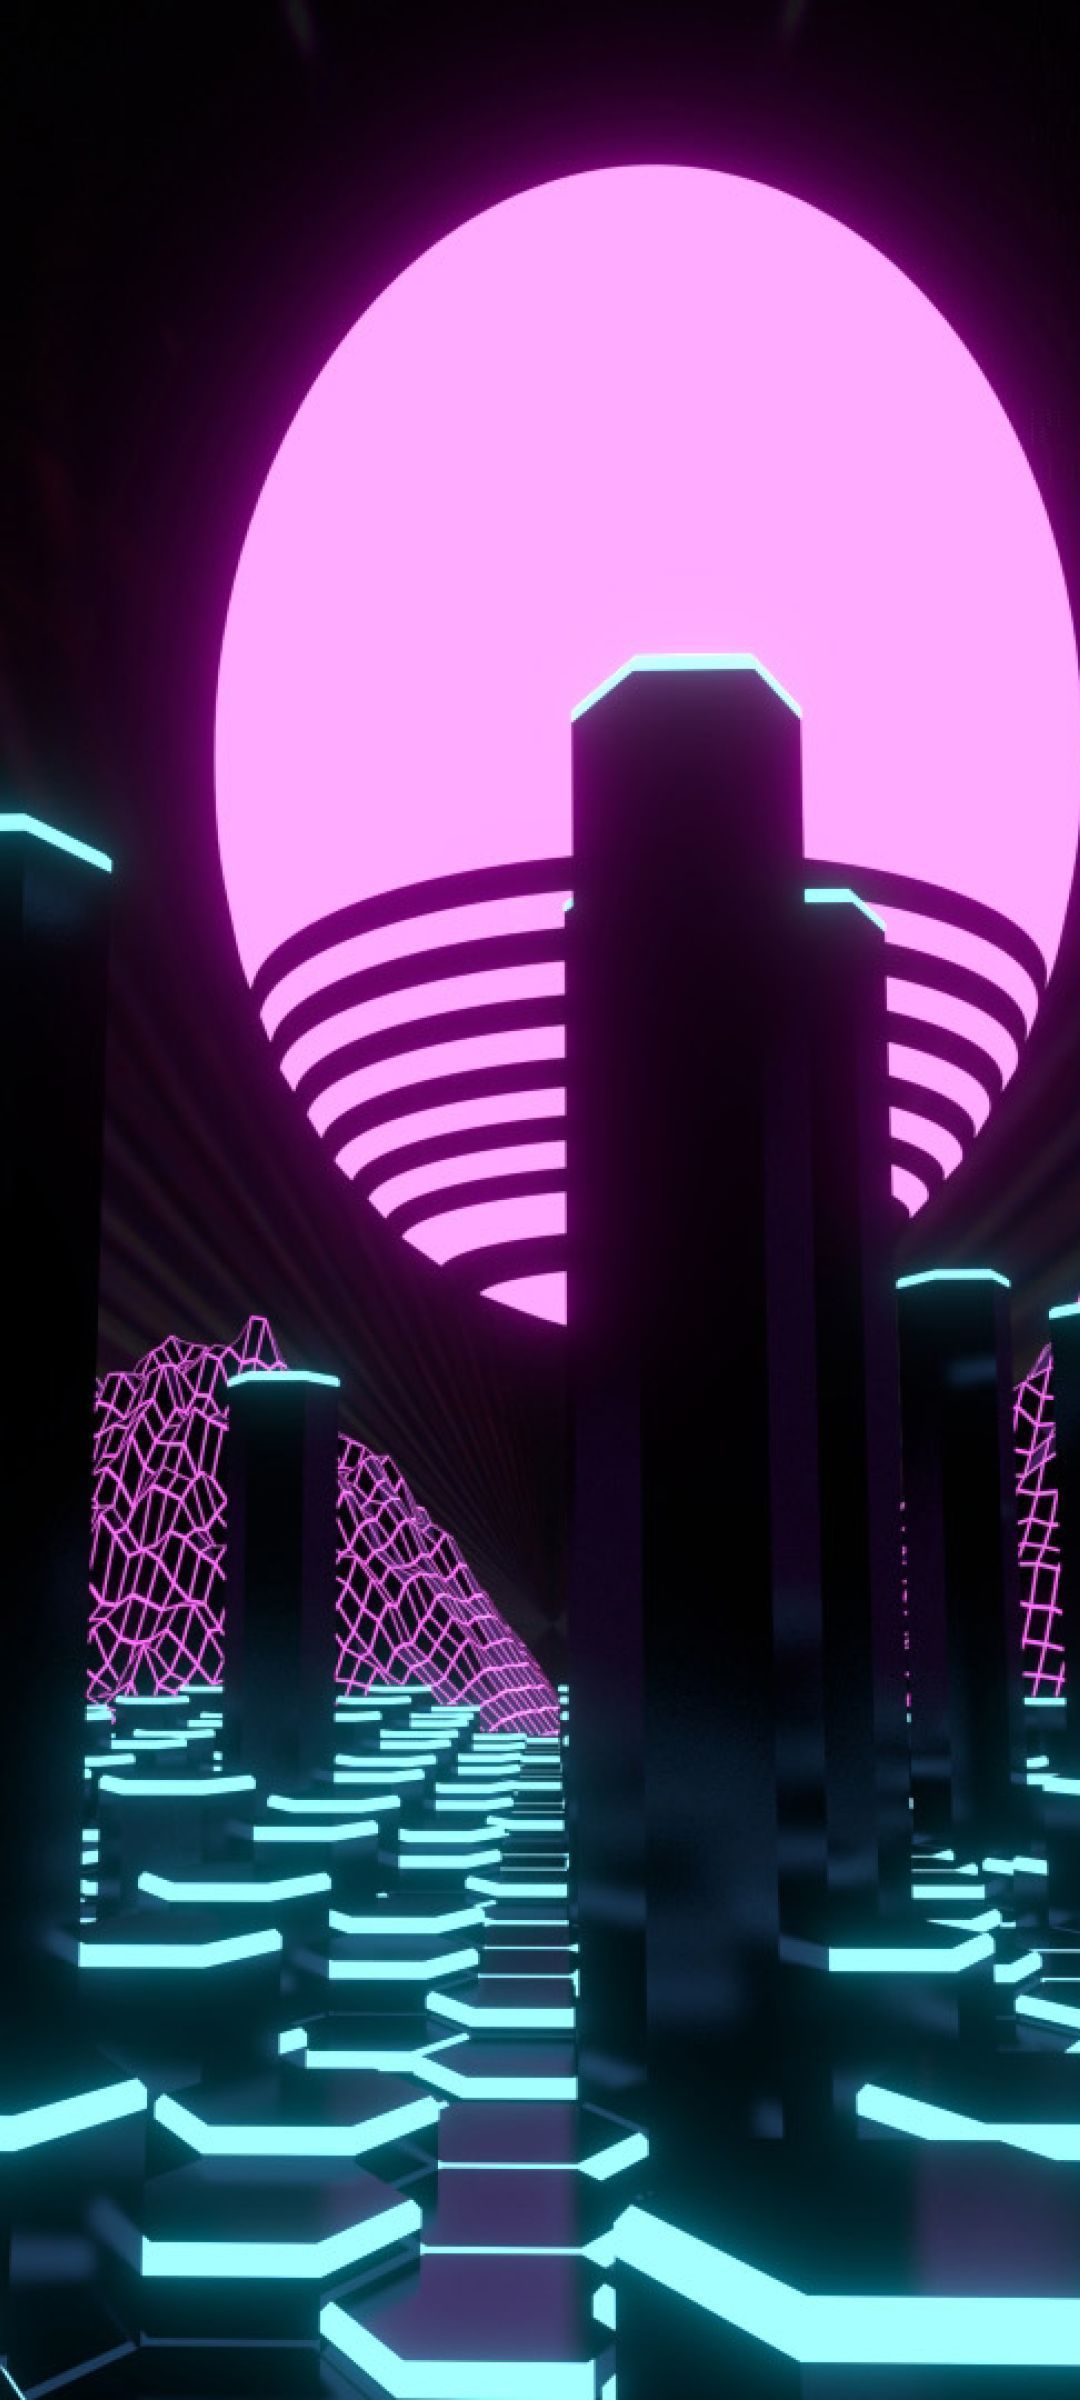 A neon city with a purple sun in the background - Dark vaporwave